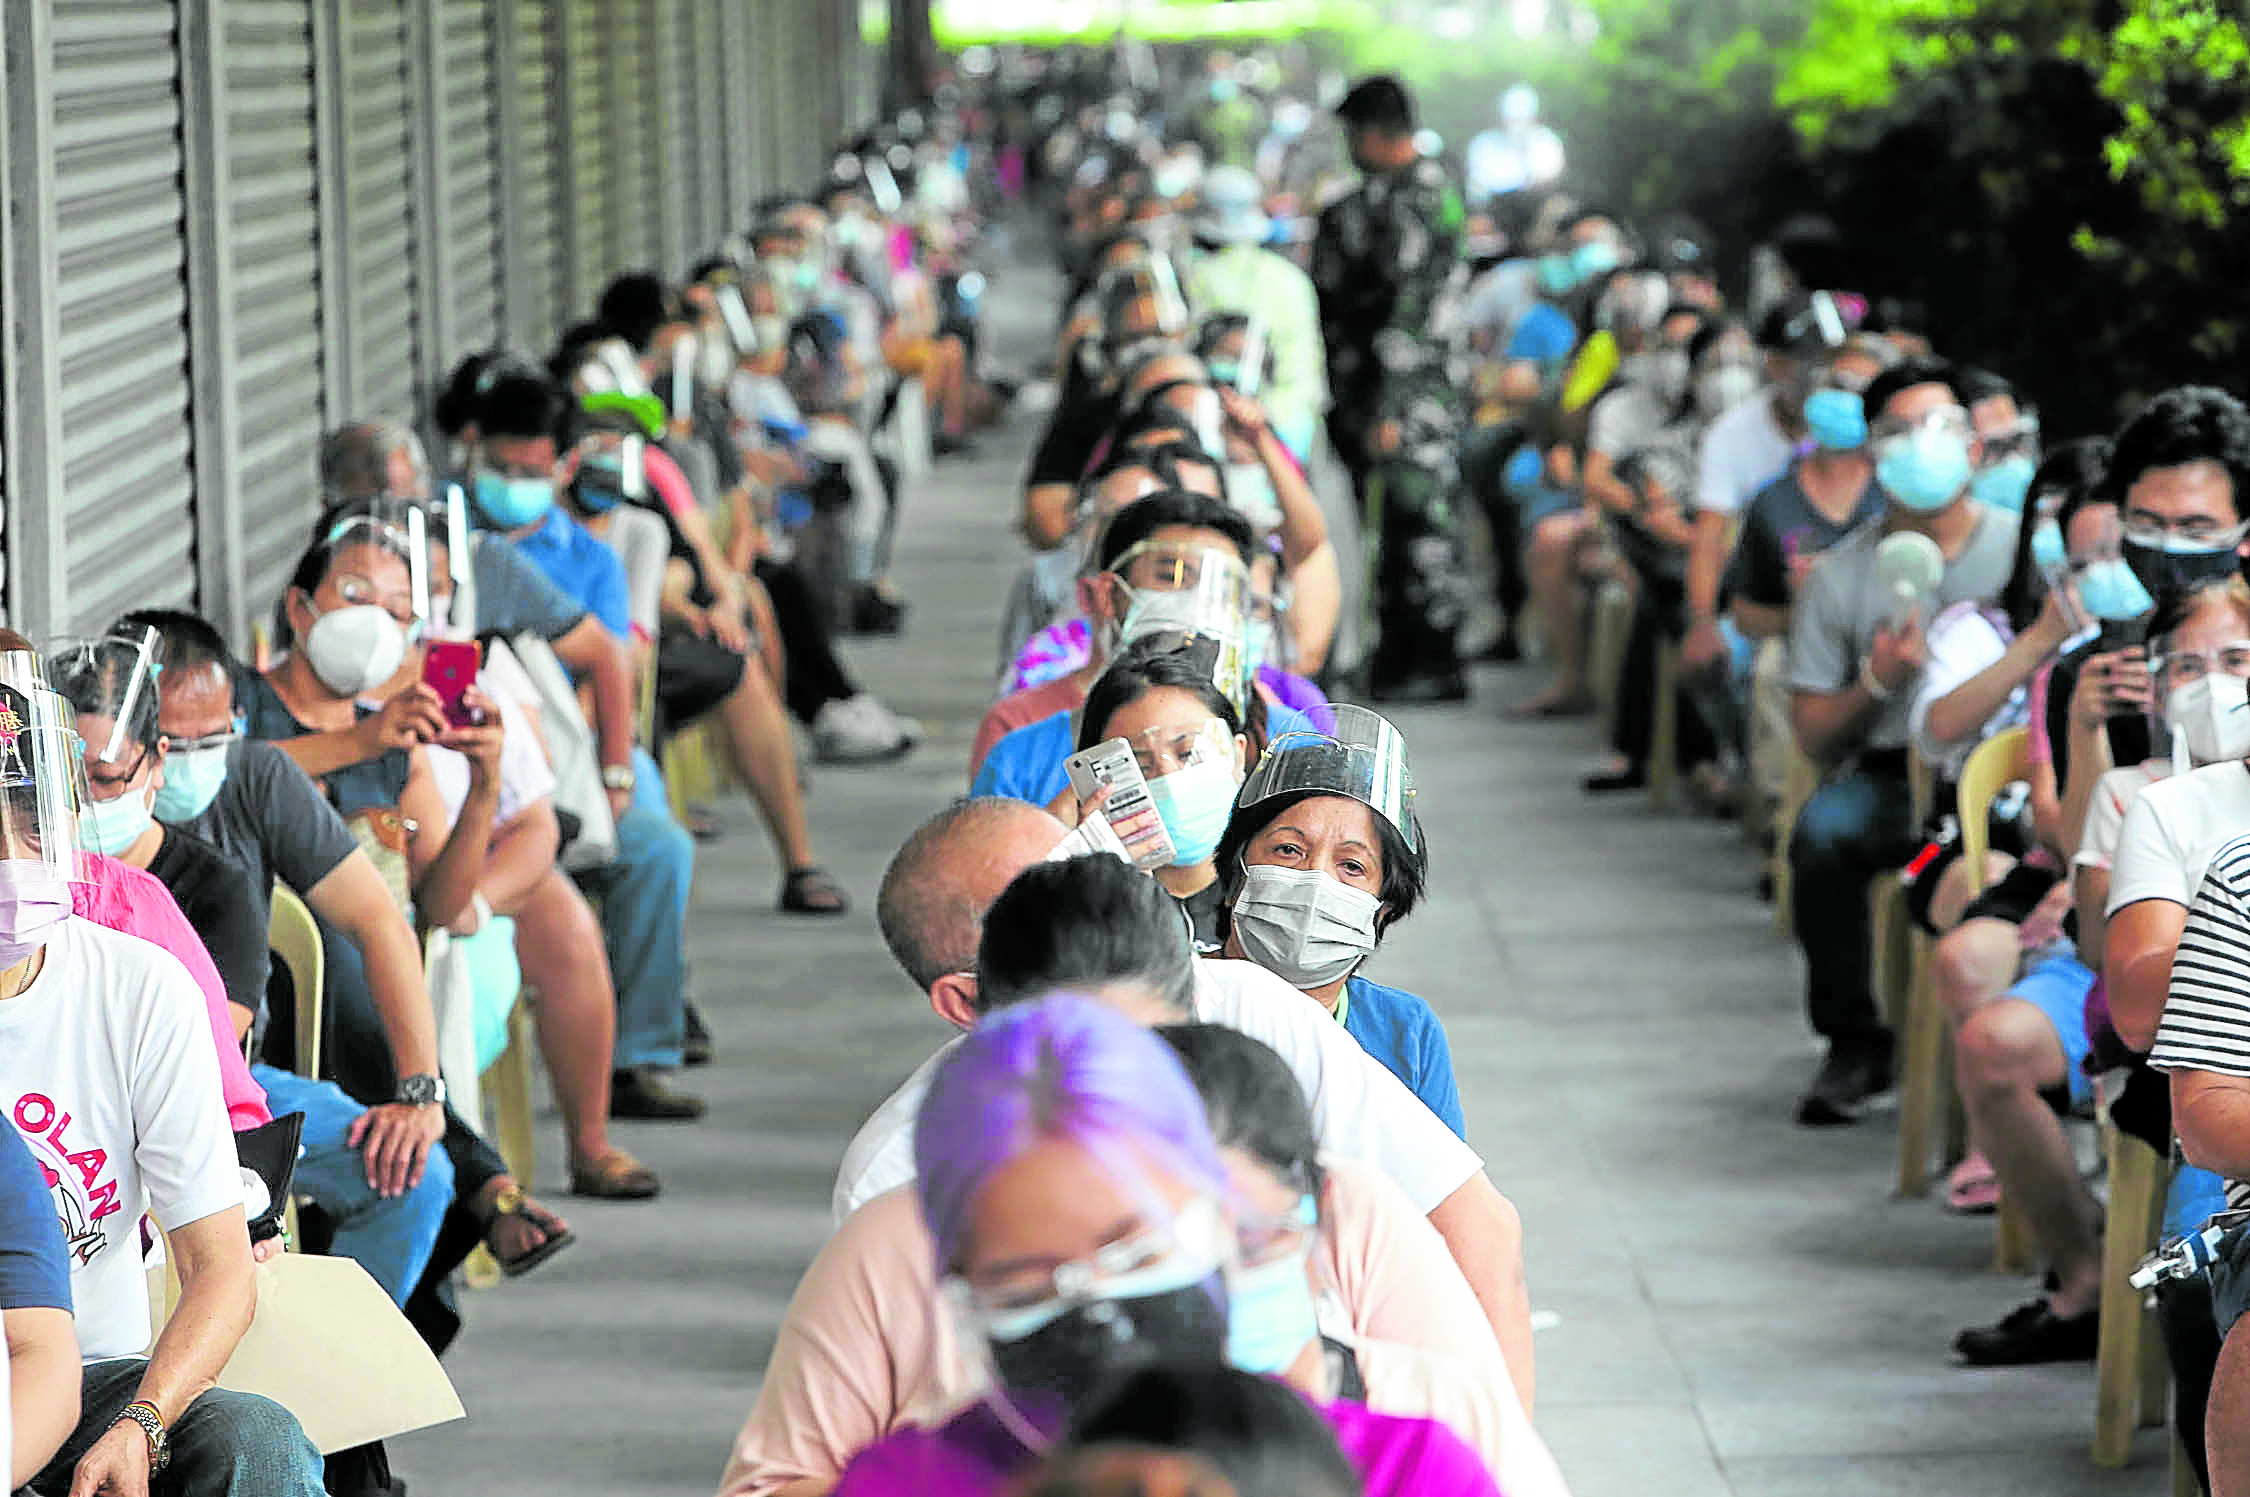 CROWD DRAWER Vaccination sites offering the US-made Pfizer jabs are drawing large crowds, such as this one outside the Prince Hotel in Ermita, Manila. Authorities have warned against potential superspreader events as the government ramps up the rollout of vaccines. —MARIANNE BERMUDEZ vaccine confidence